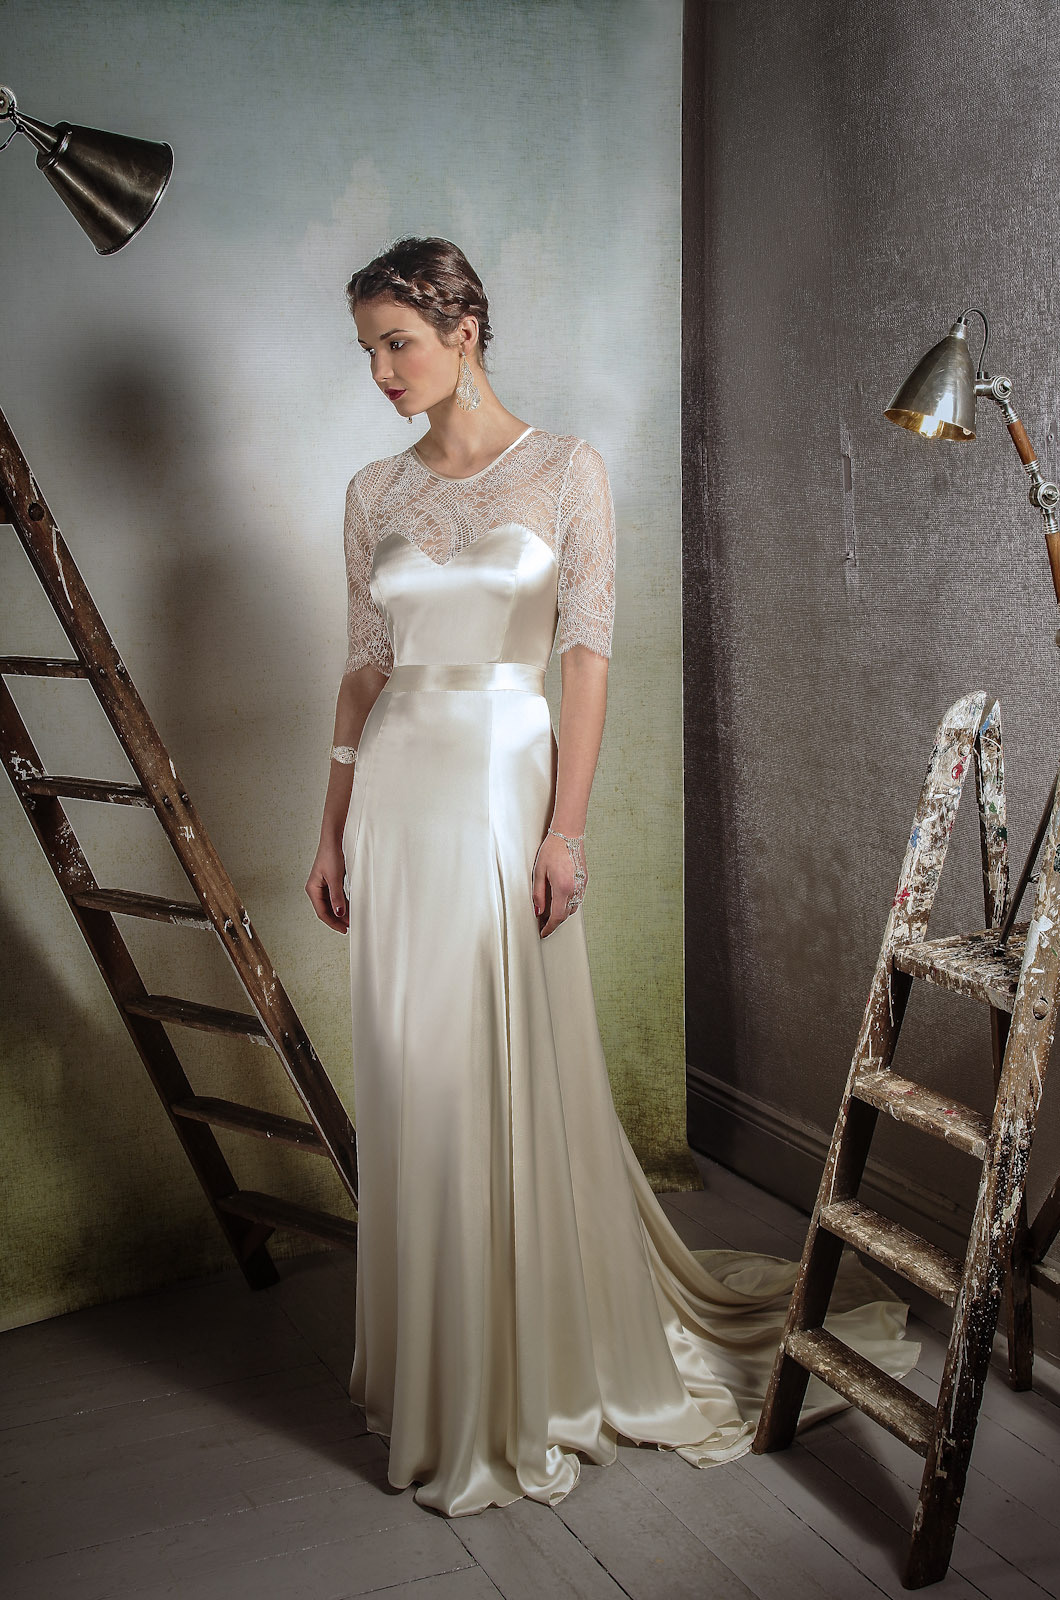 Belle & Bunty's 2014 Bridal Capsule Collection - Darcey